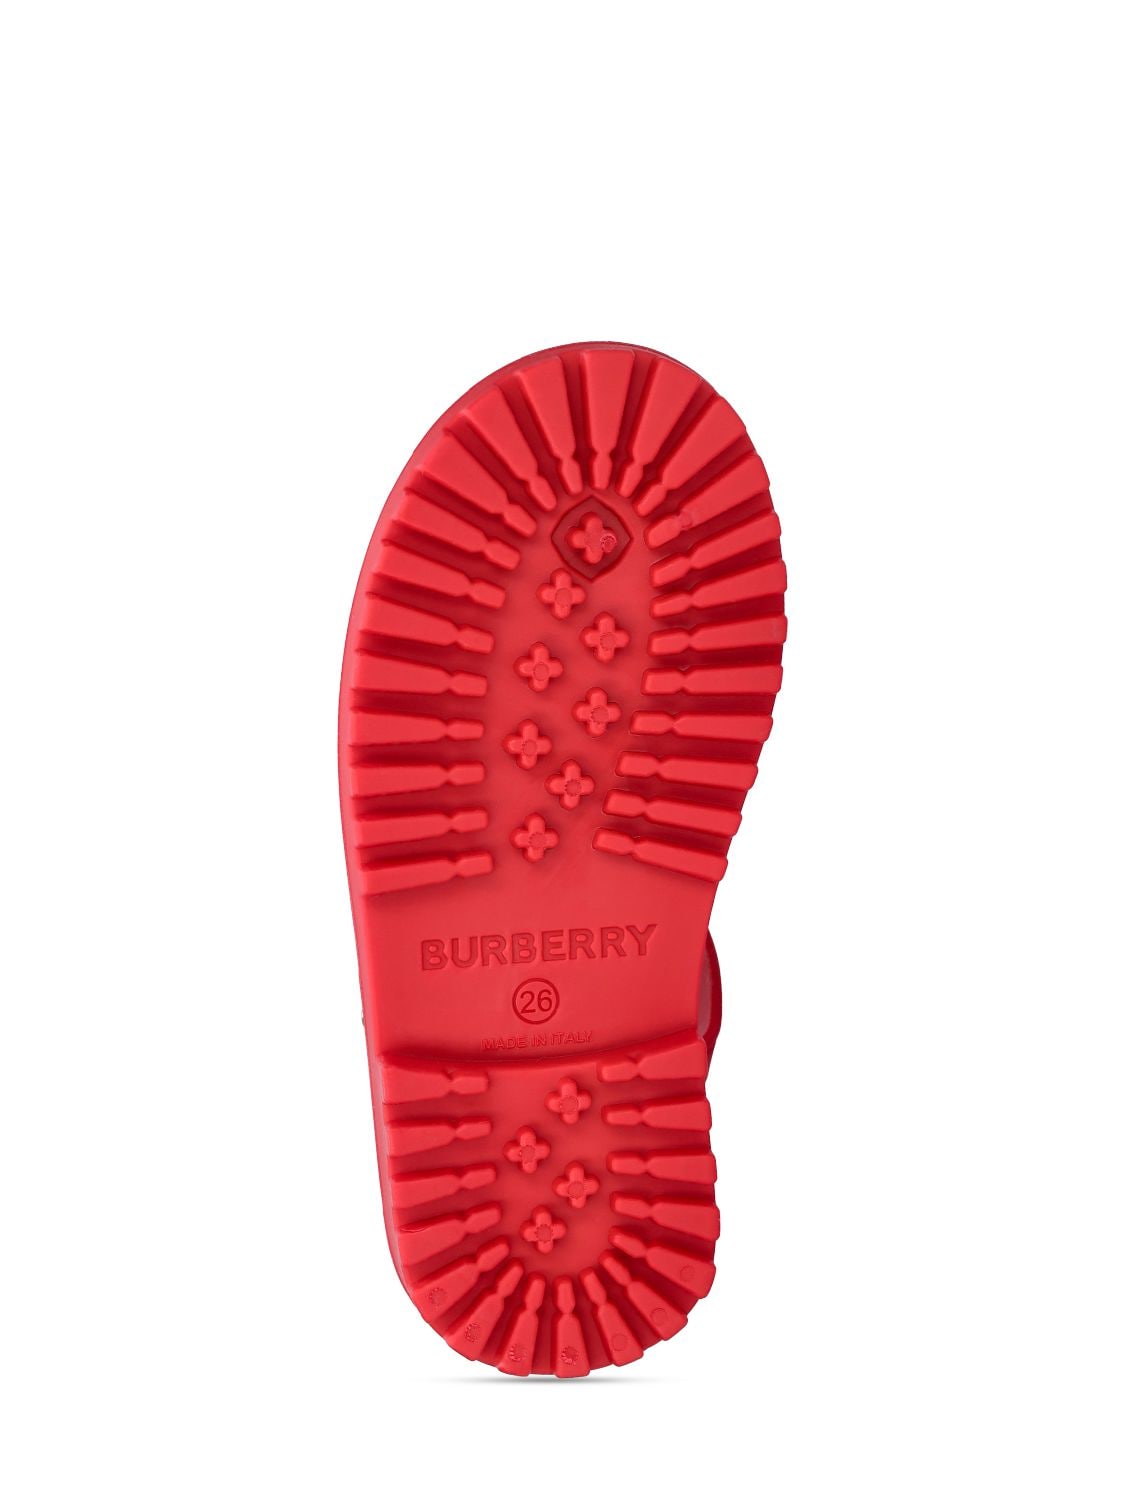 Shop Burberry Rubber Sandals In Red